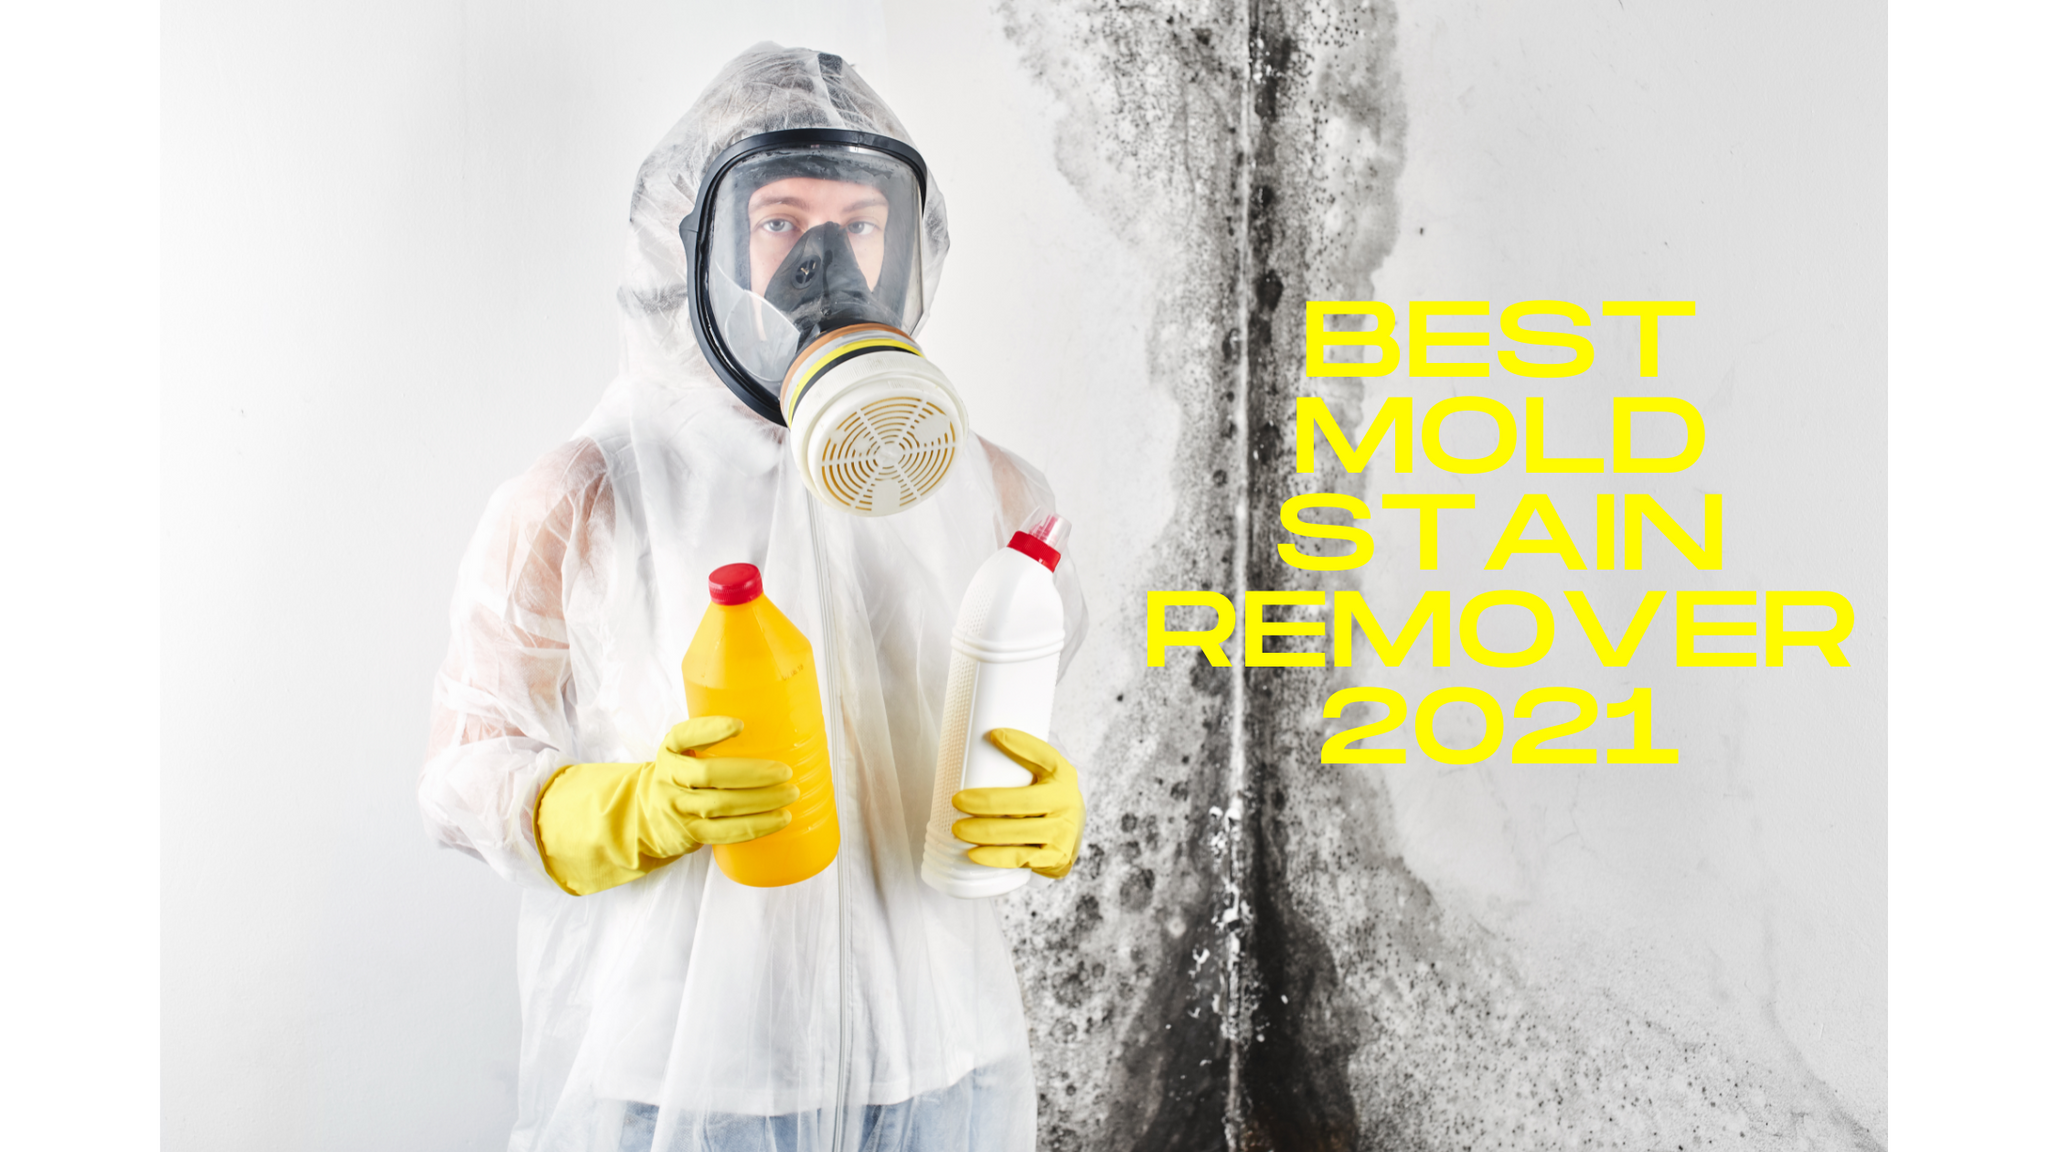 Best Mold Stain Remover 2021